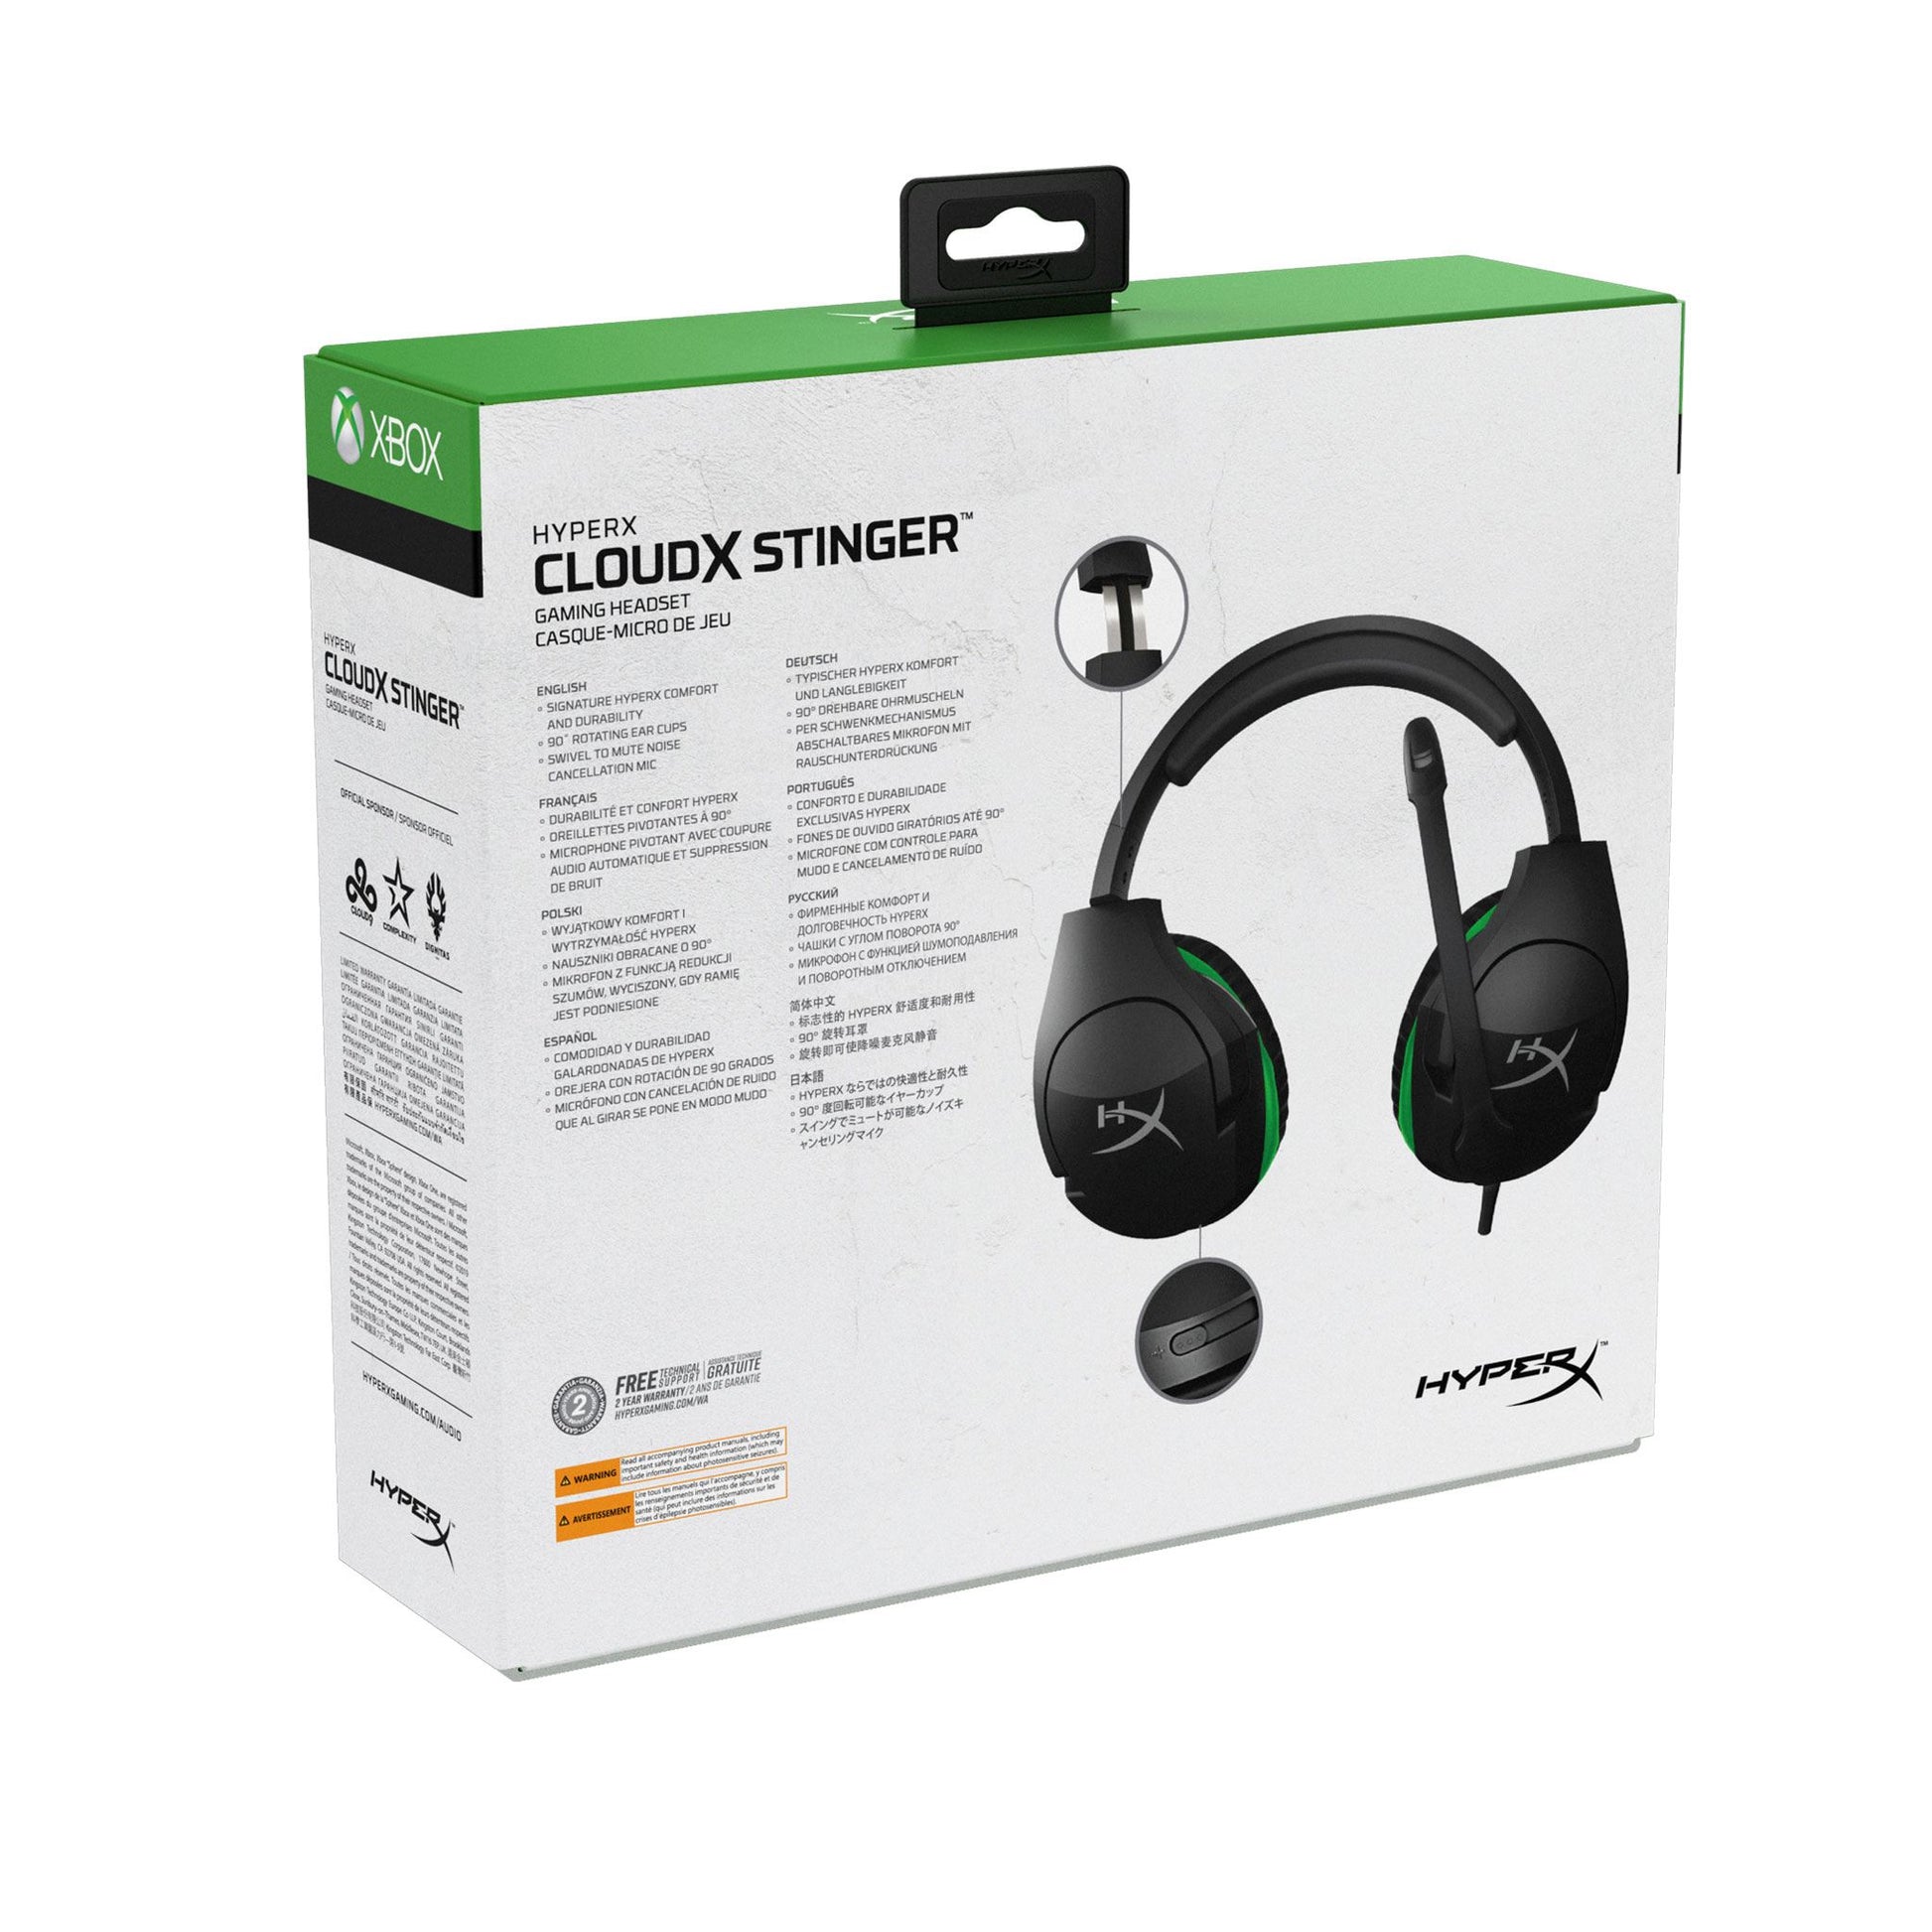 HyperX CloudX Stinger Wired Gaming SpadezStore Headset for Xbox - X|S One/Series